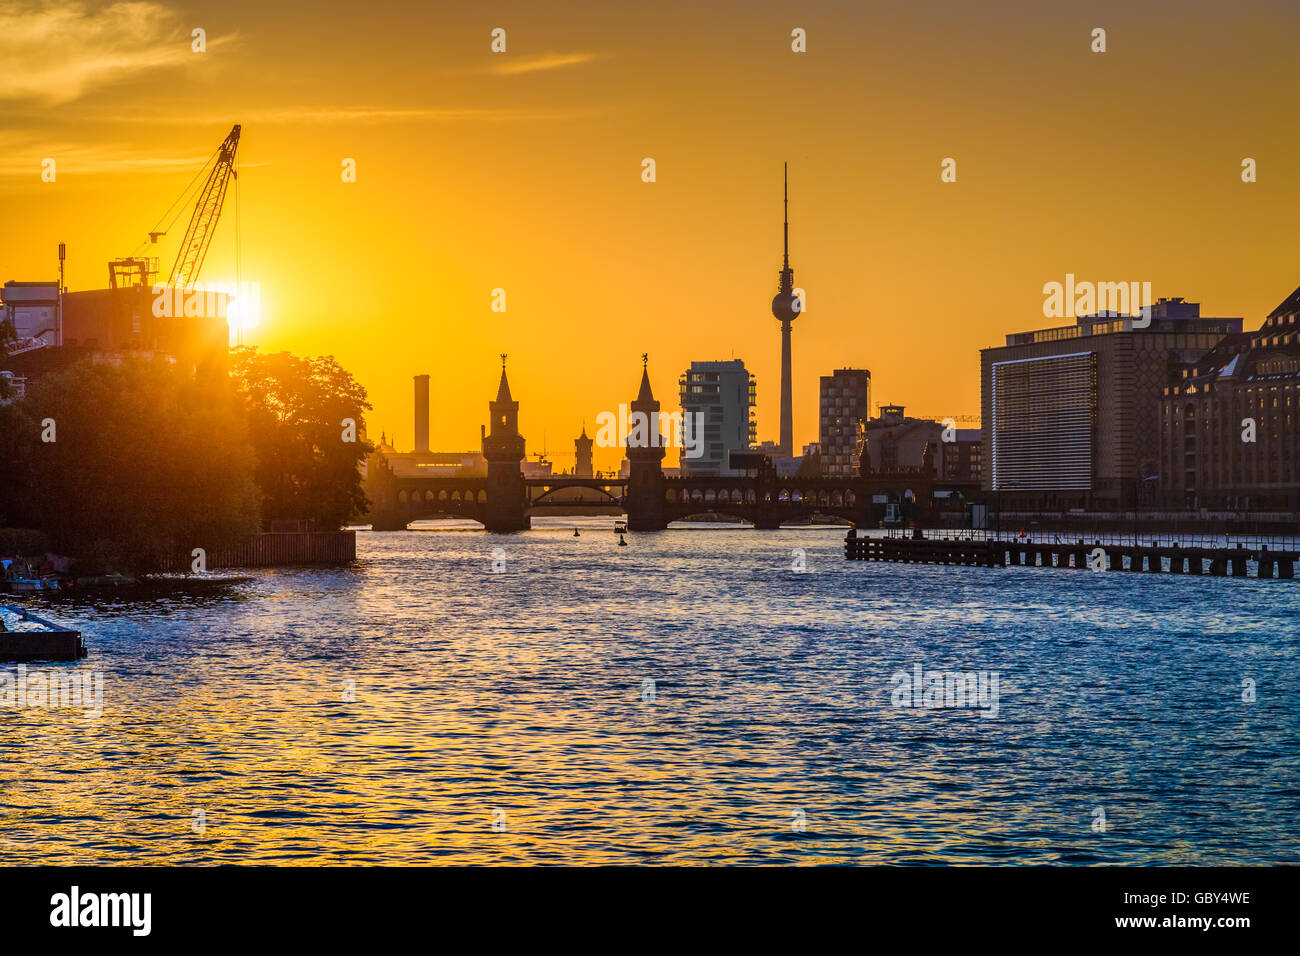 Classic view of Berlin skyline with famous TV tower and Oberbaum Bridge at river Spree in evening light at sunset, Germany Stock Photo